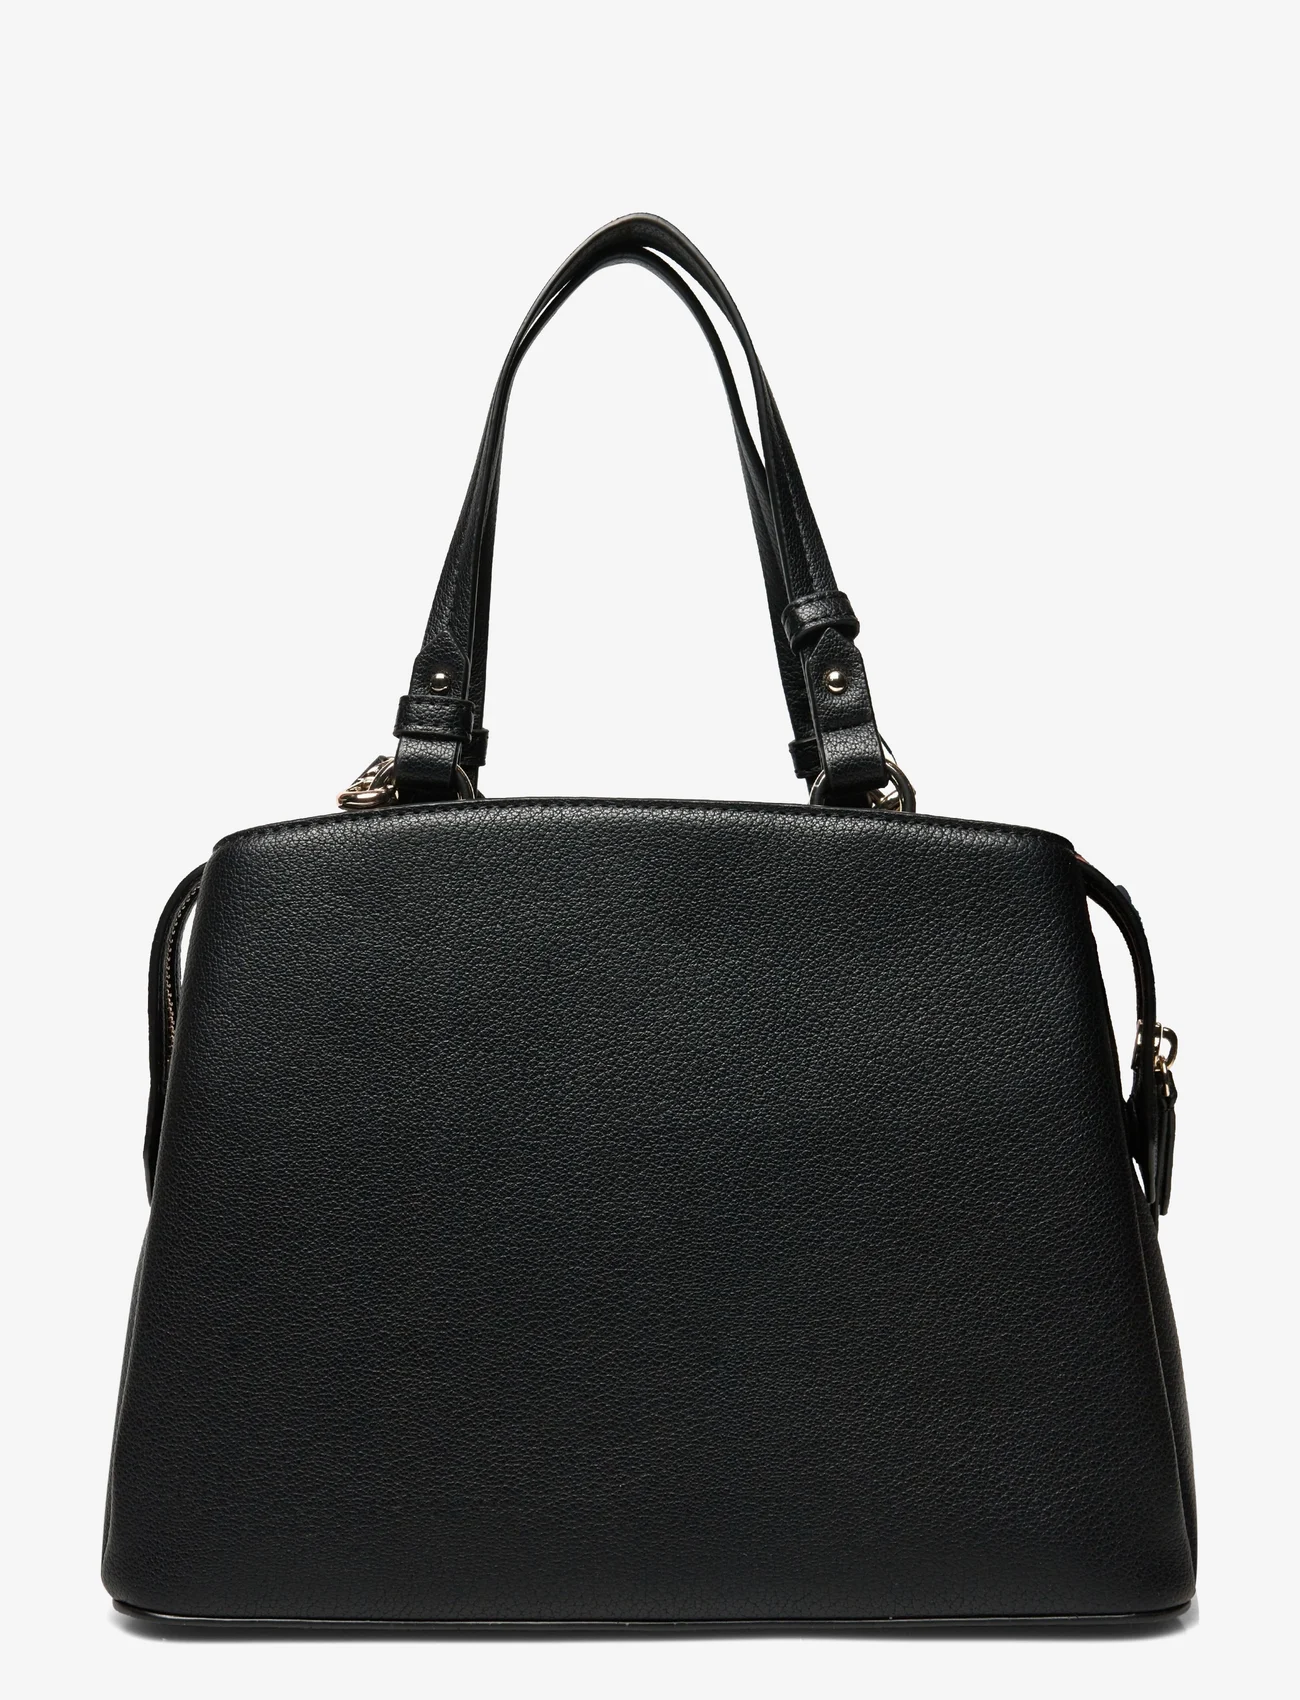 DKNY Bags - SEVENTH AVENUE MD SA - party wear at outlet prices - bbl - blk/black - 1